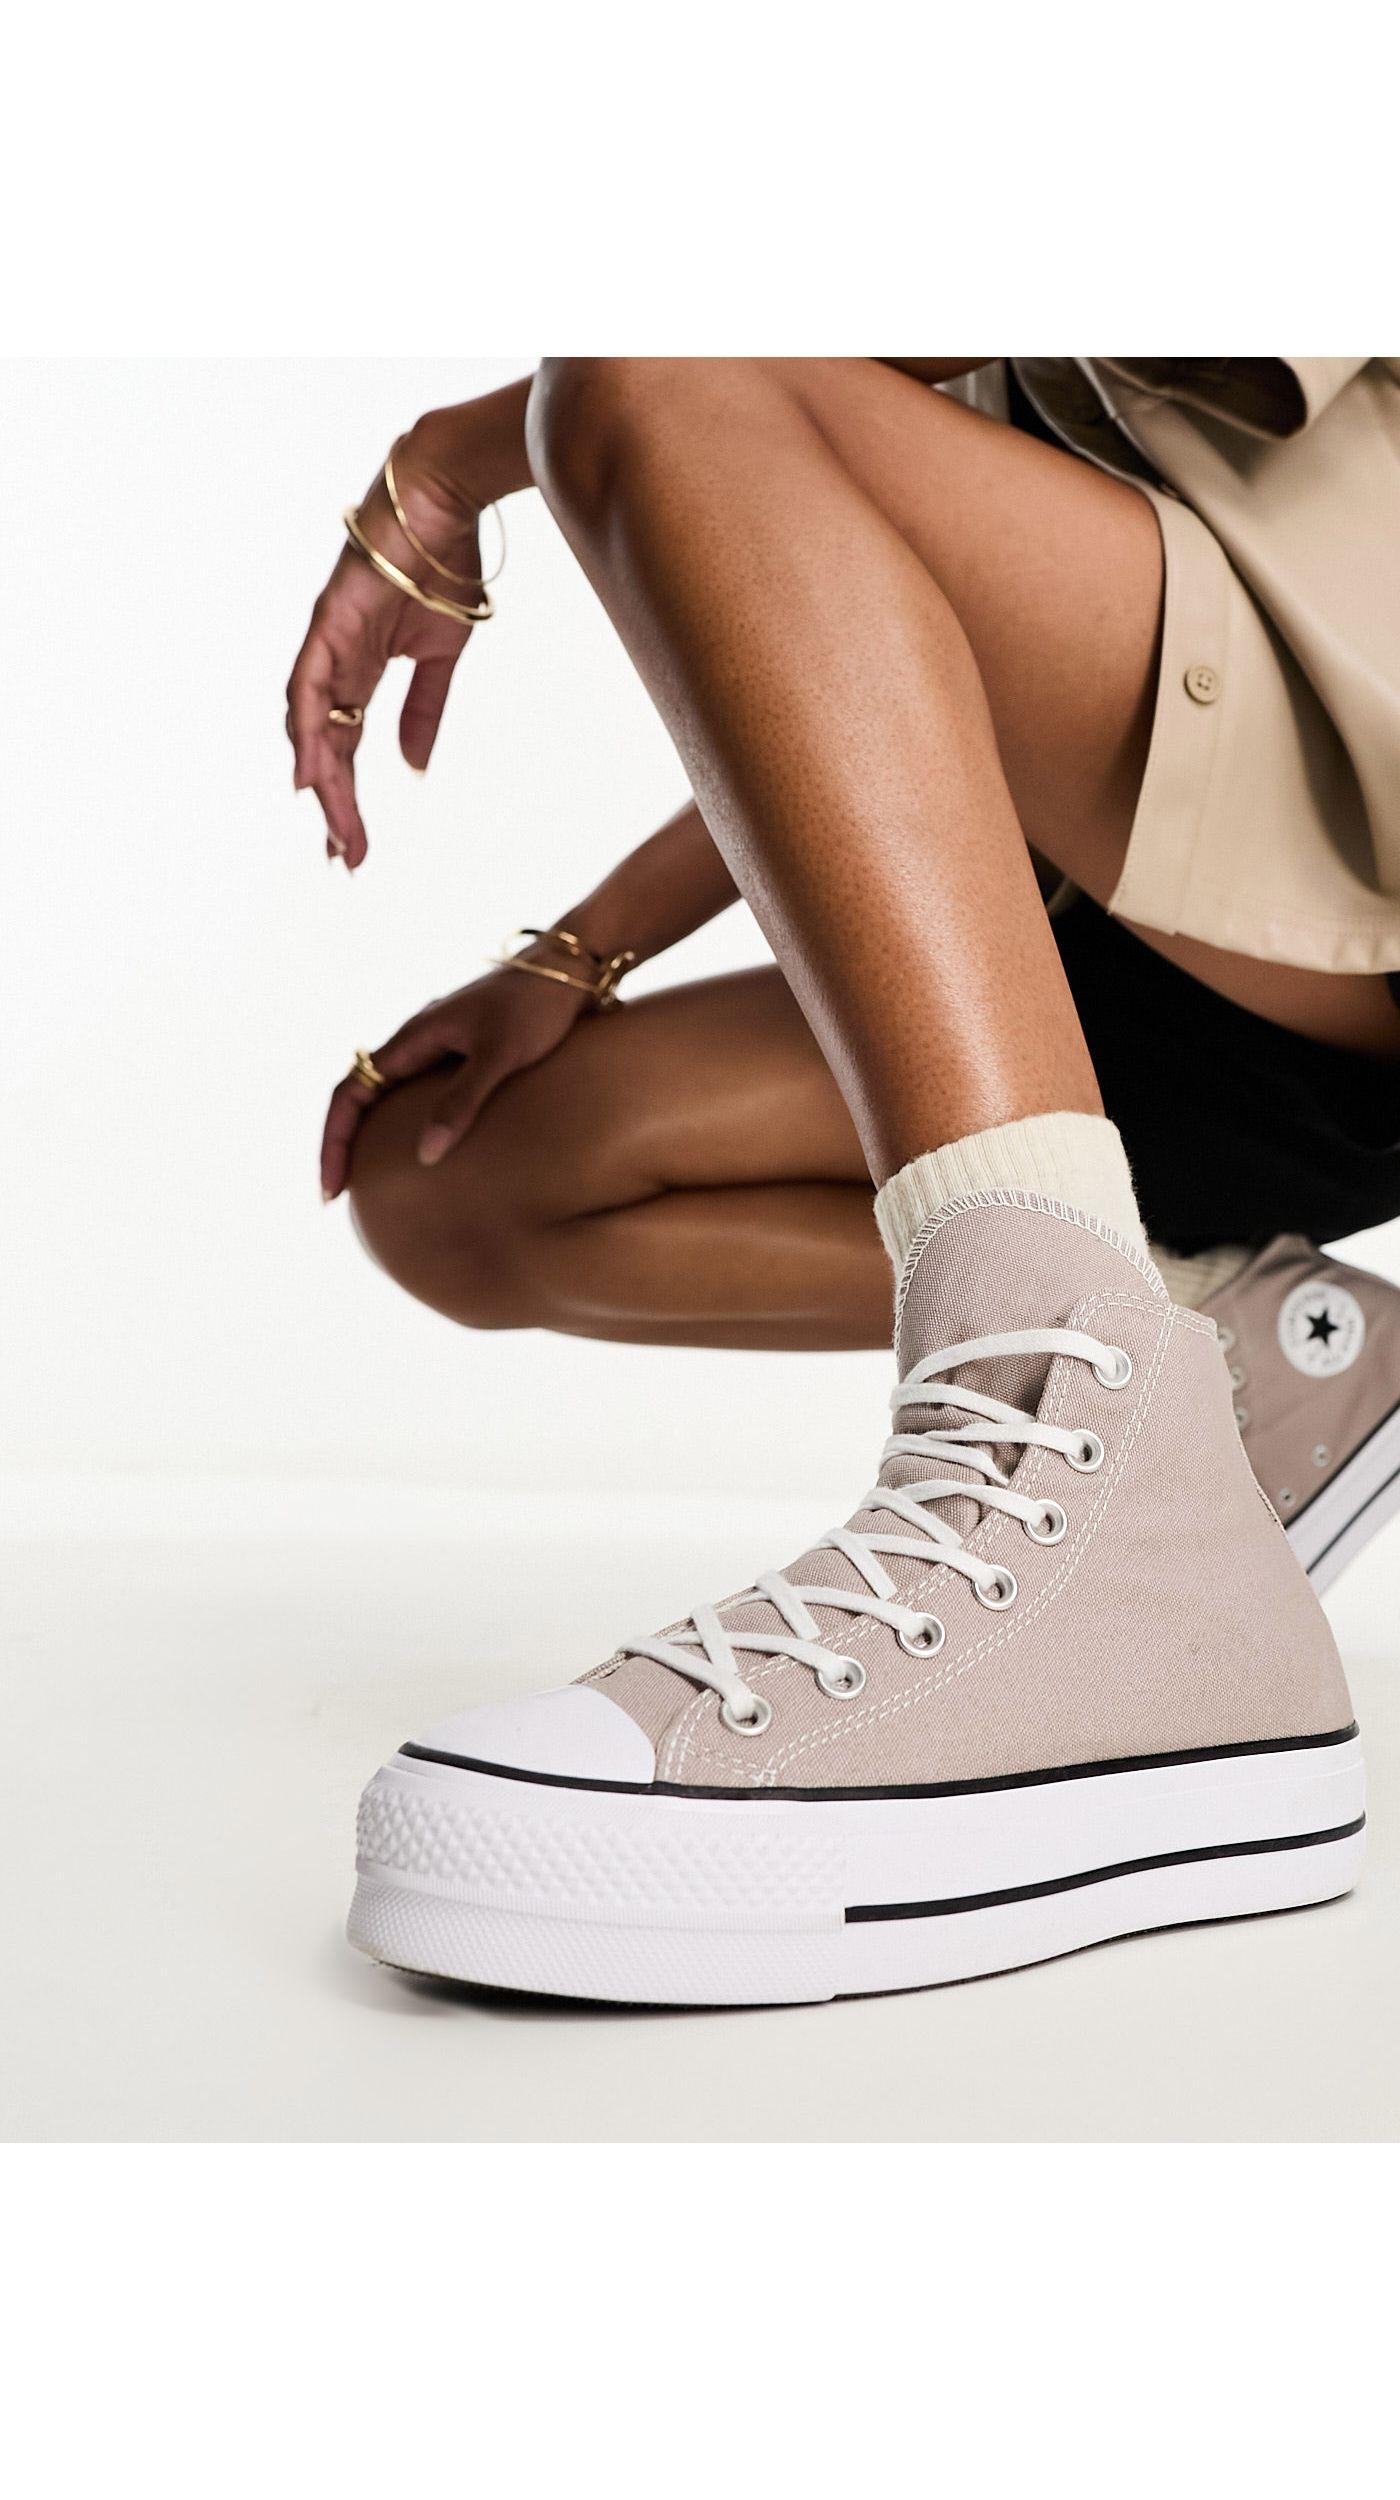 Converse Chuck Taylor All Star Lift Platform Hi Sneakers in White | Lyst